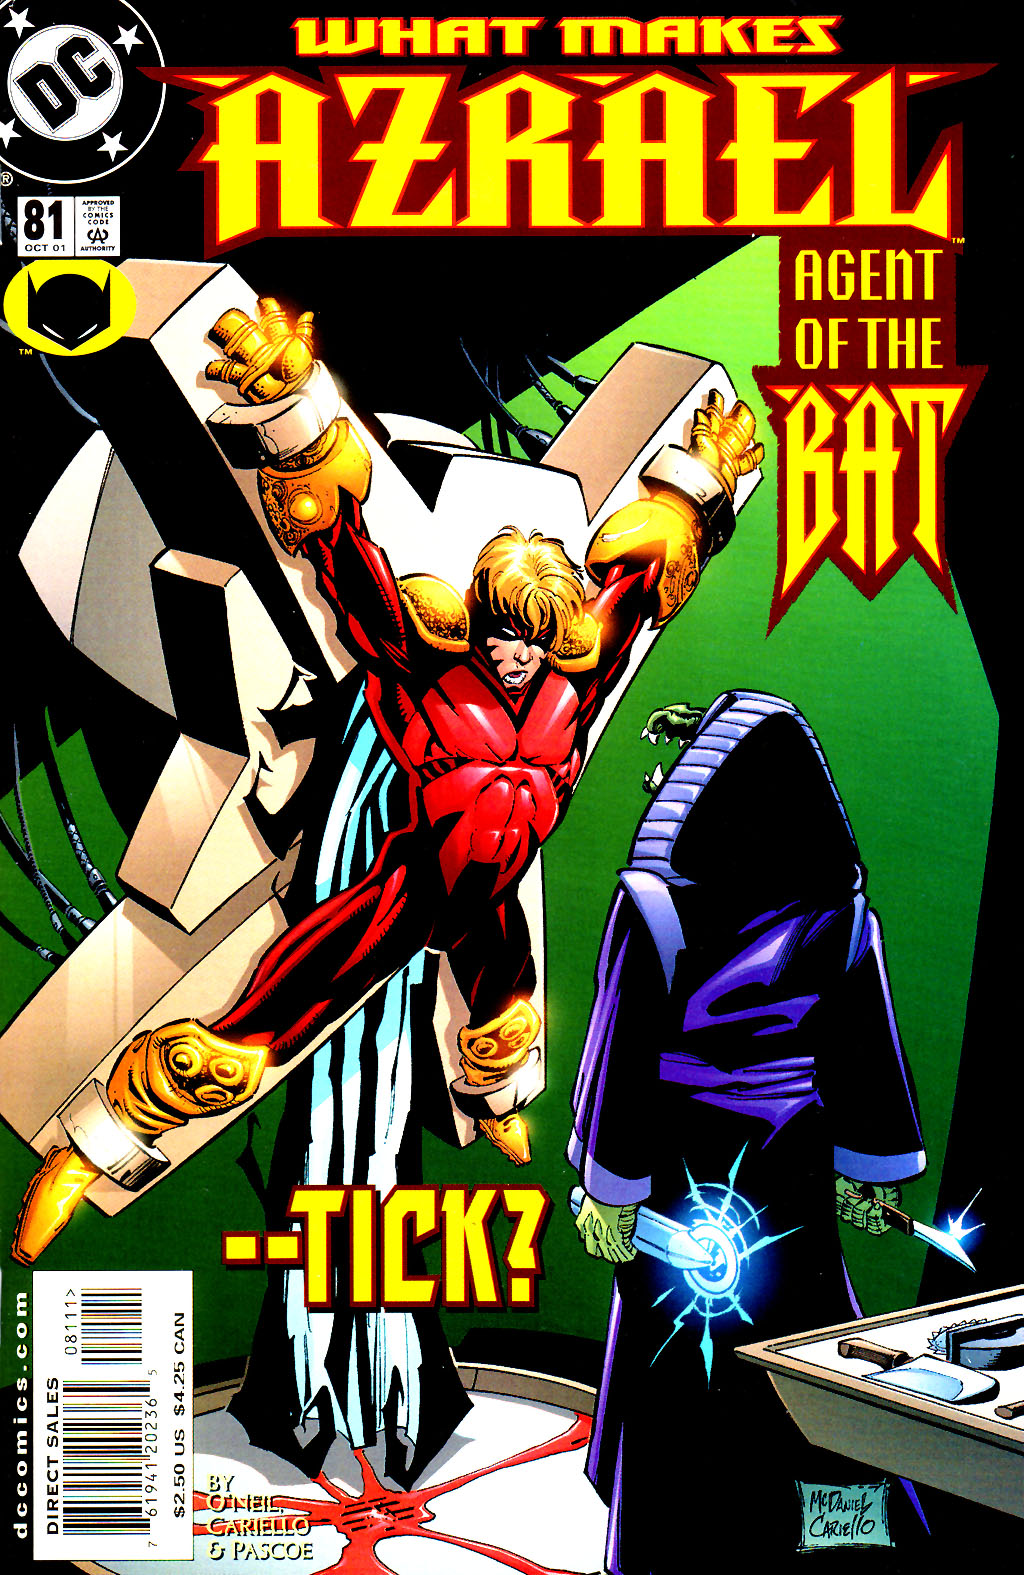 Read online Azrael: Agent of the Bat comic -  Issue #81 - 1